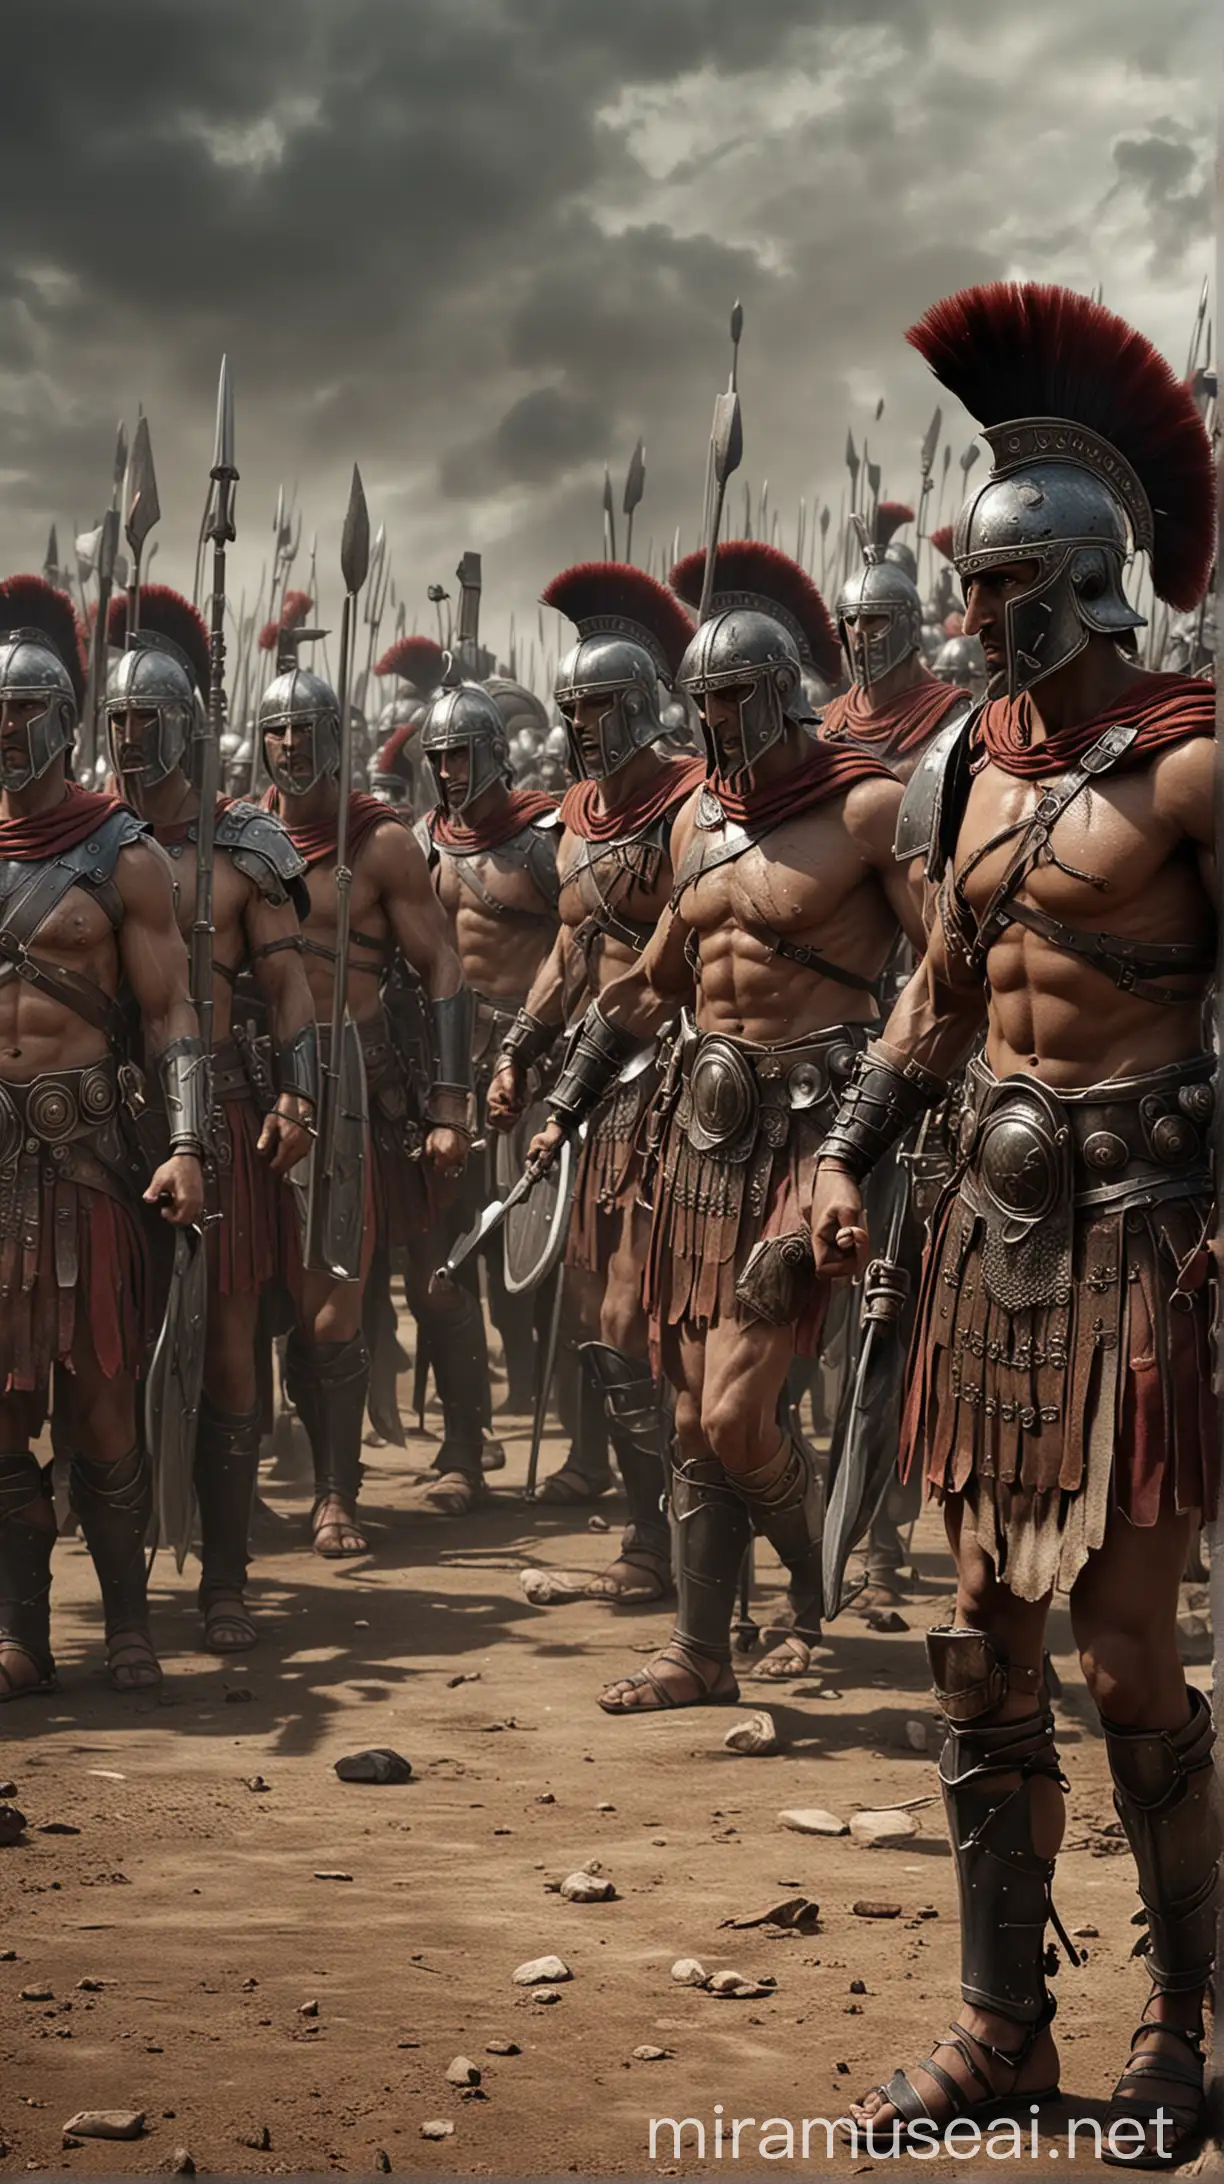 Depict elite Spartan hoplites maintaining their unbreakable phalanx formation, showcasing their discipline and unity in battle. hyper realistic